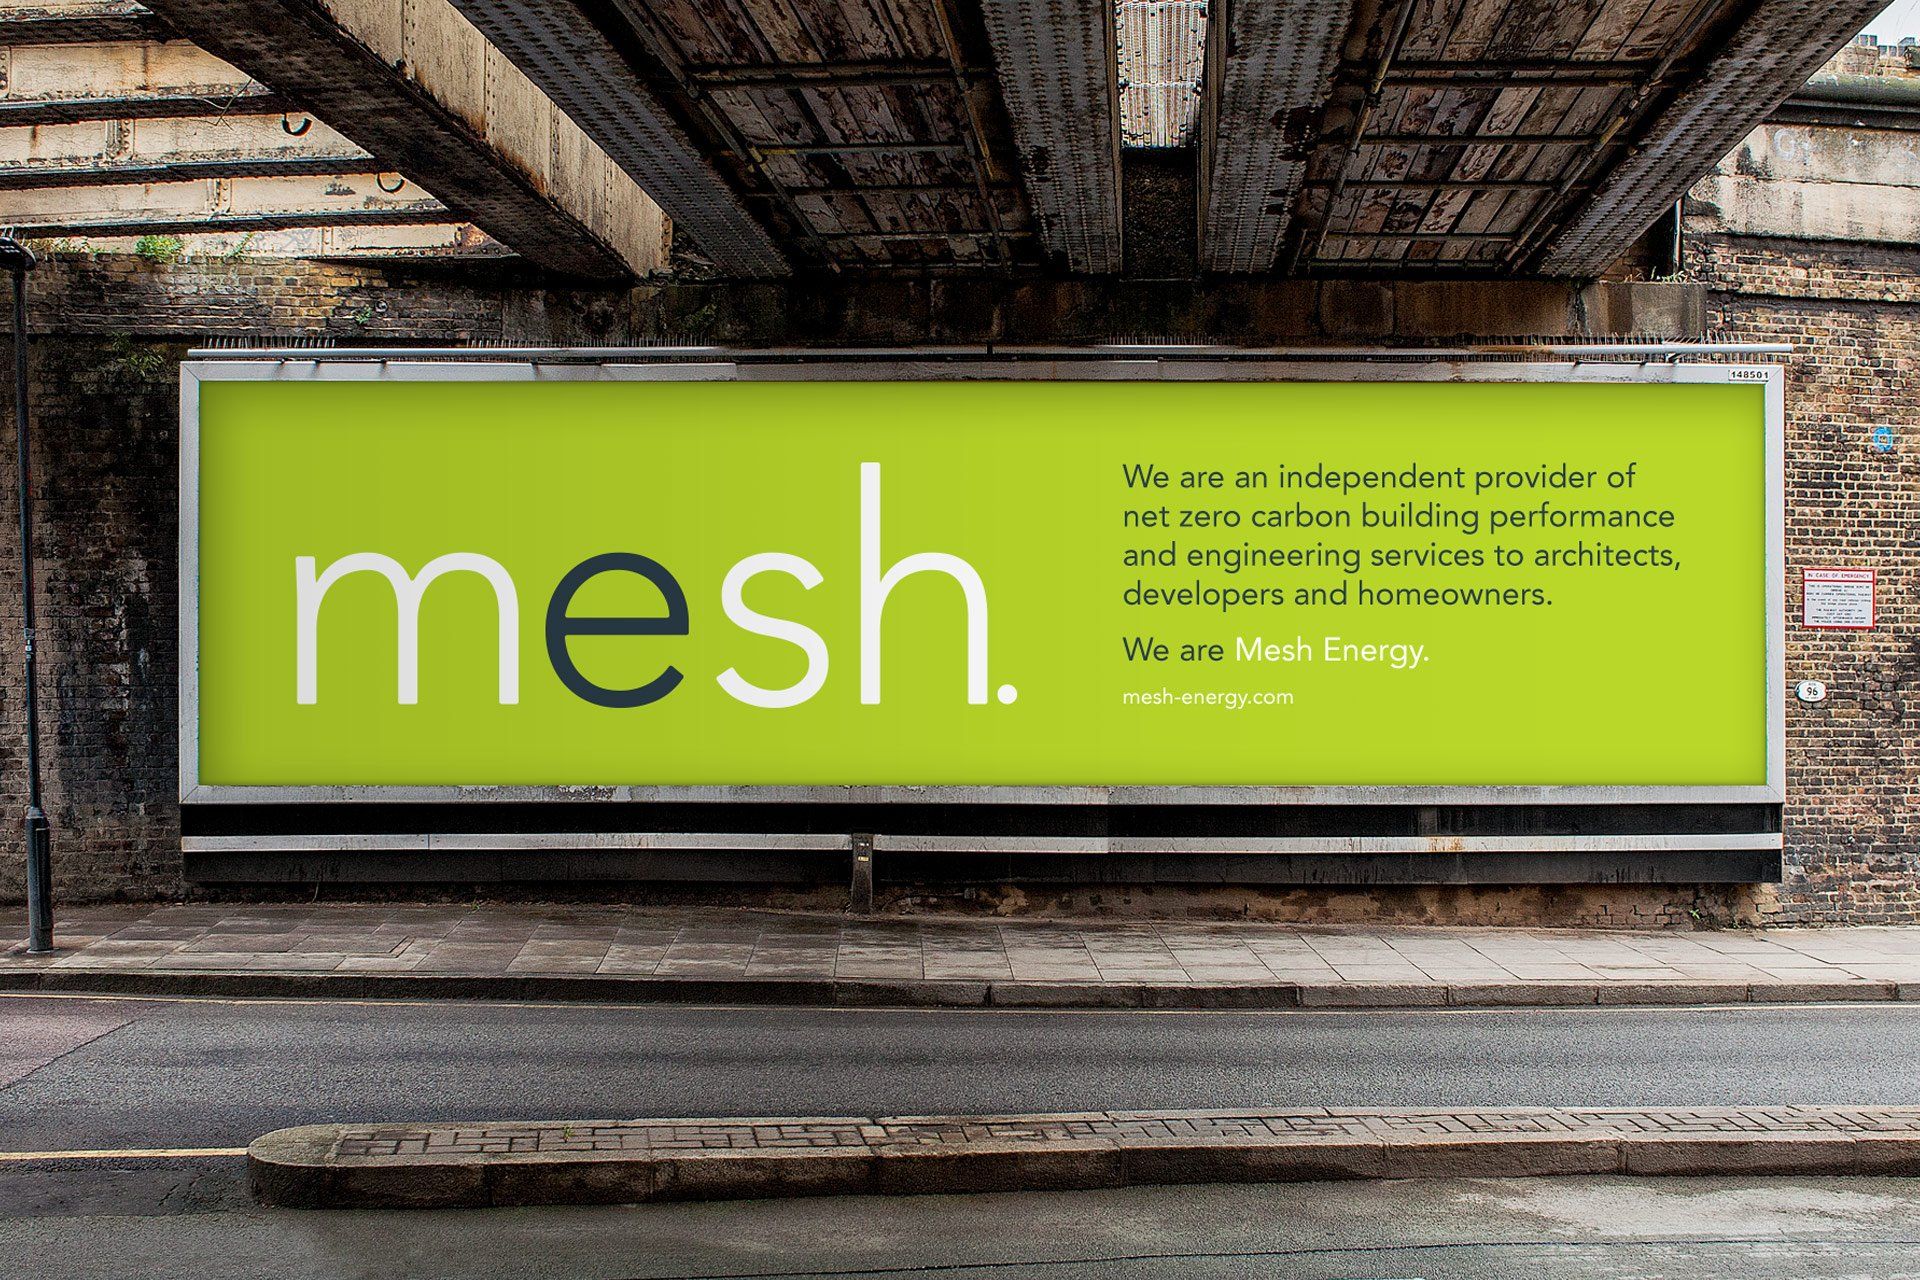 A large billboard set against a brick wall features the mesh logo and a description of the brand and its purpose.